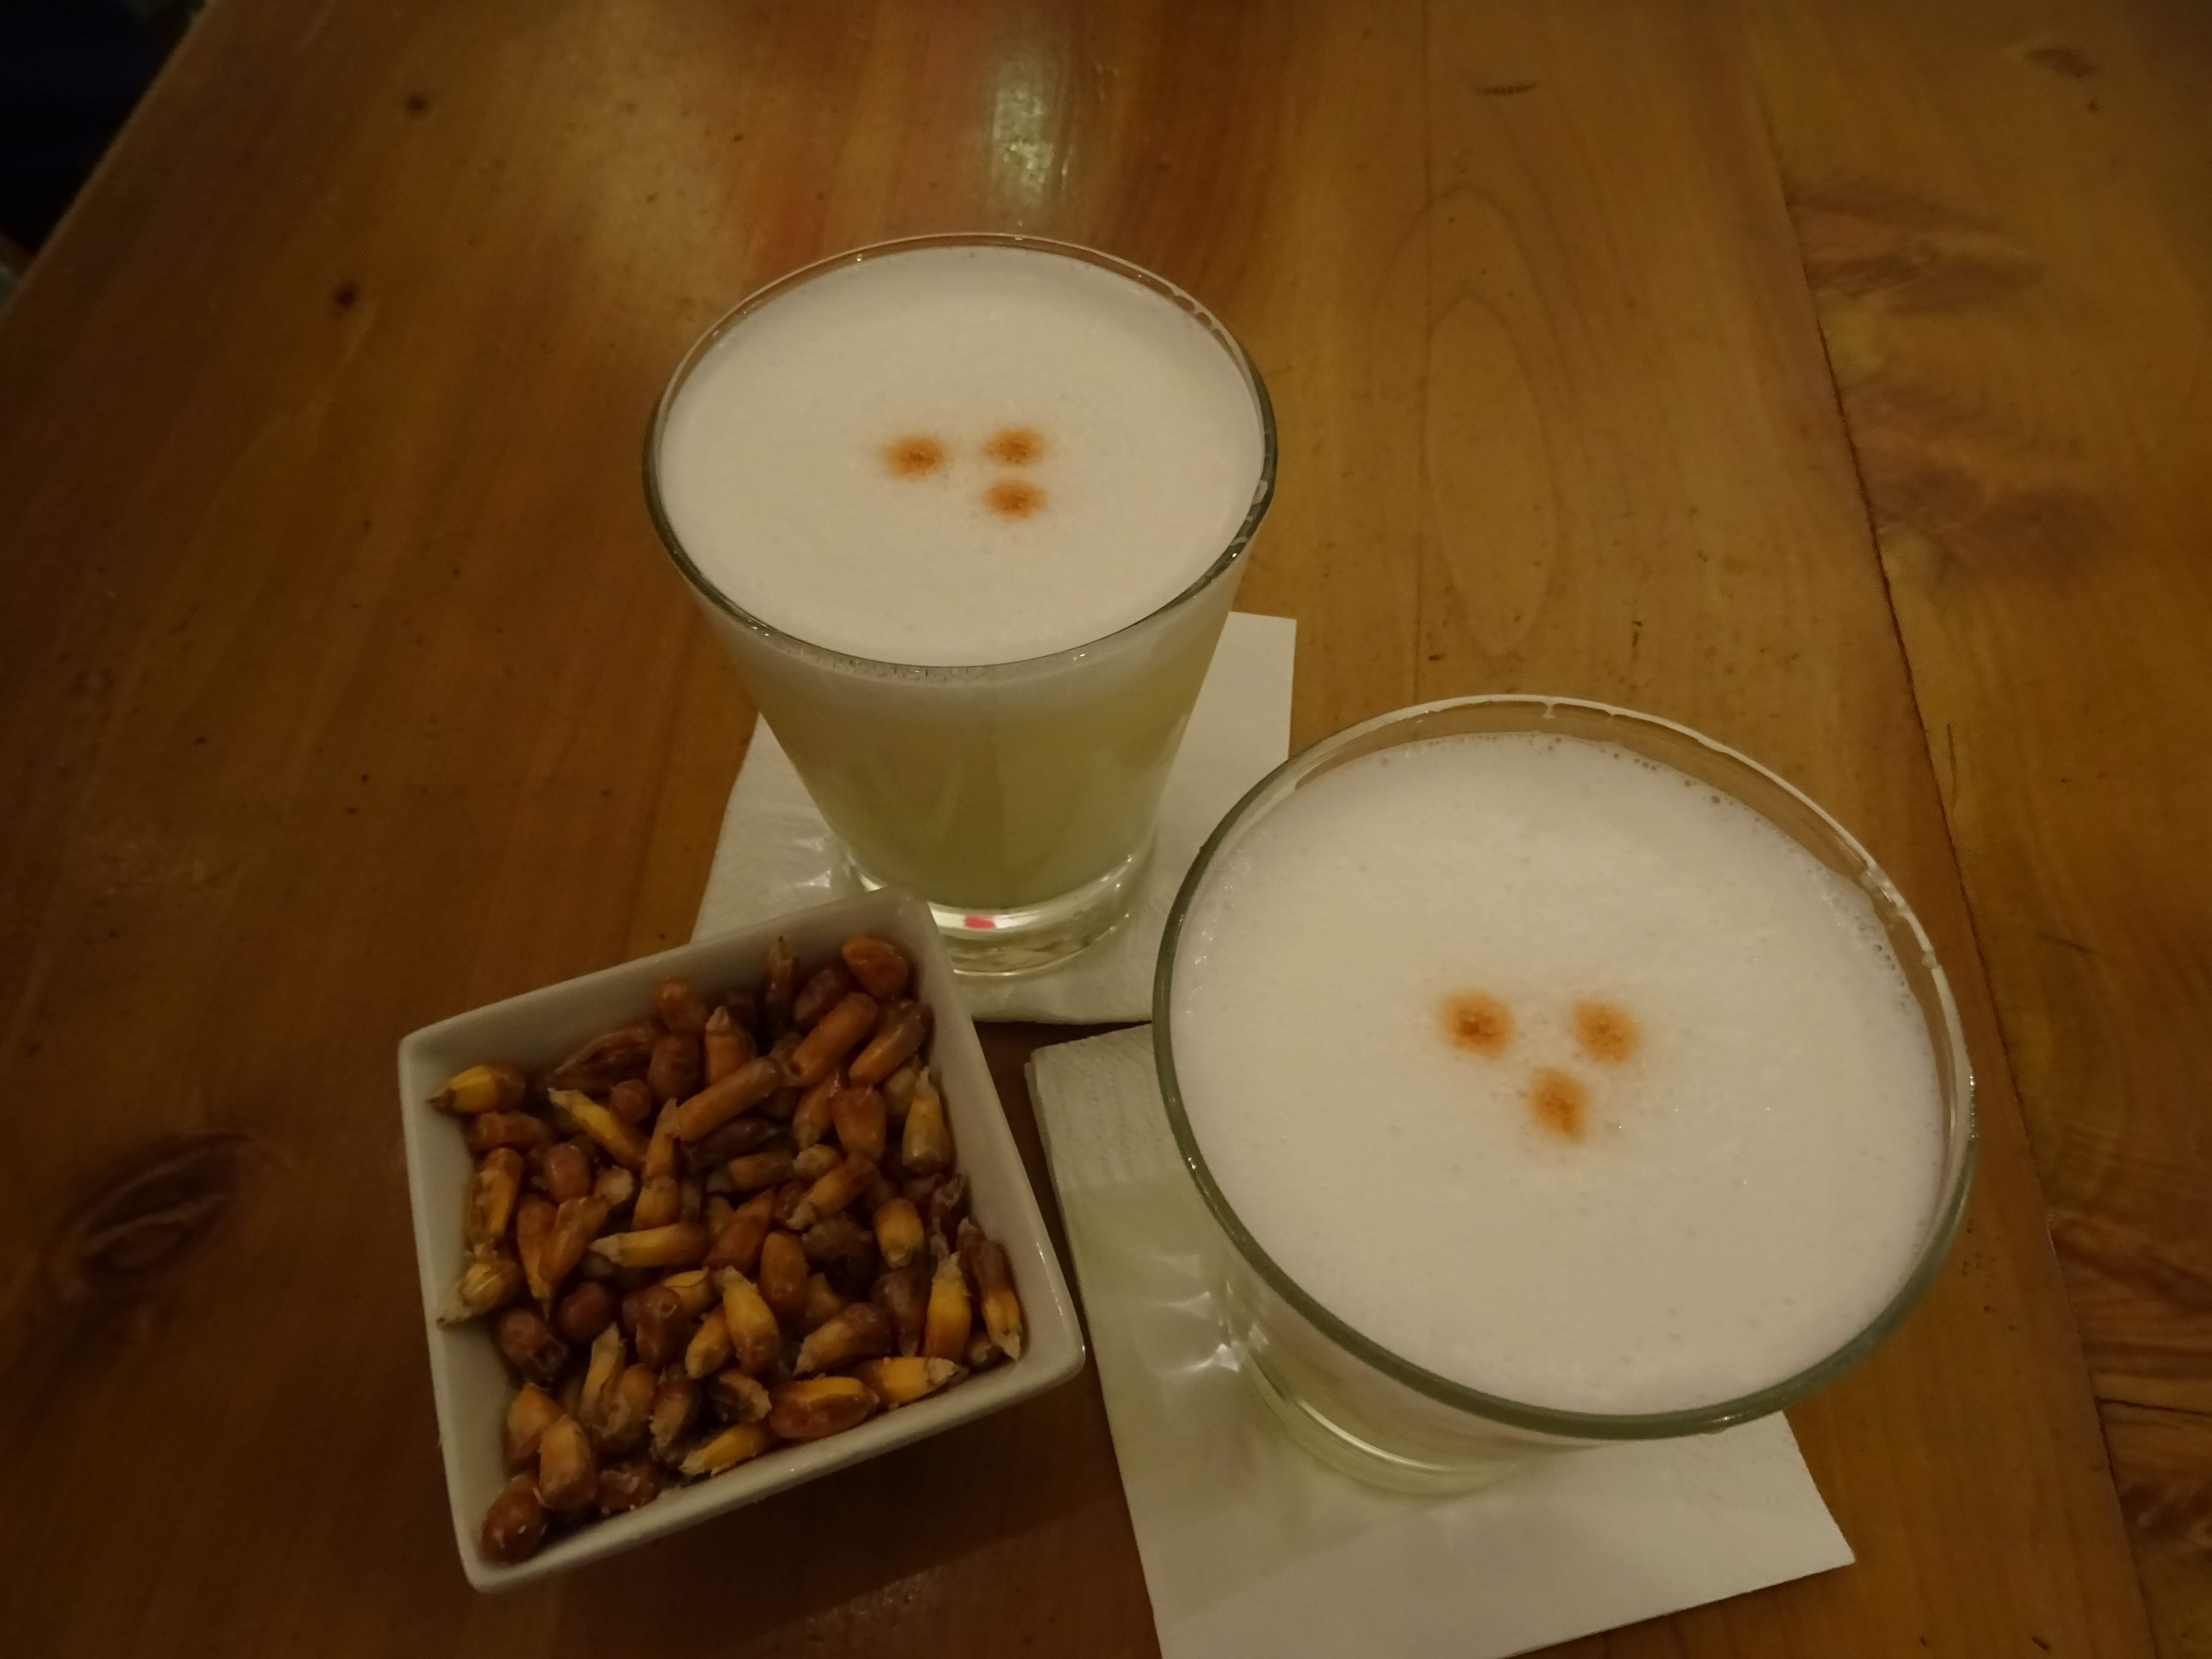 Well made Pisco sour and corns